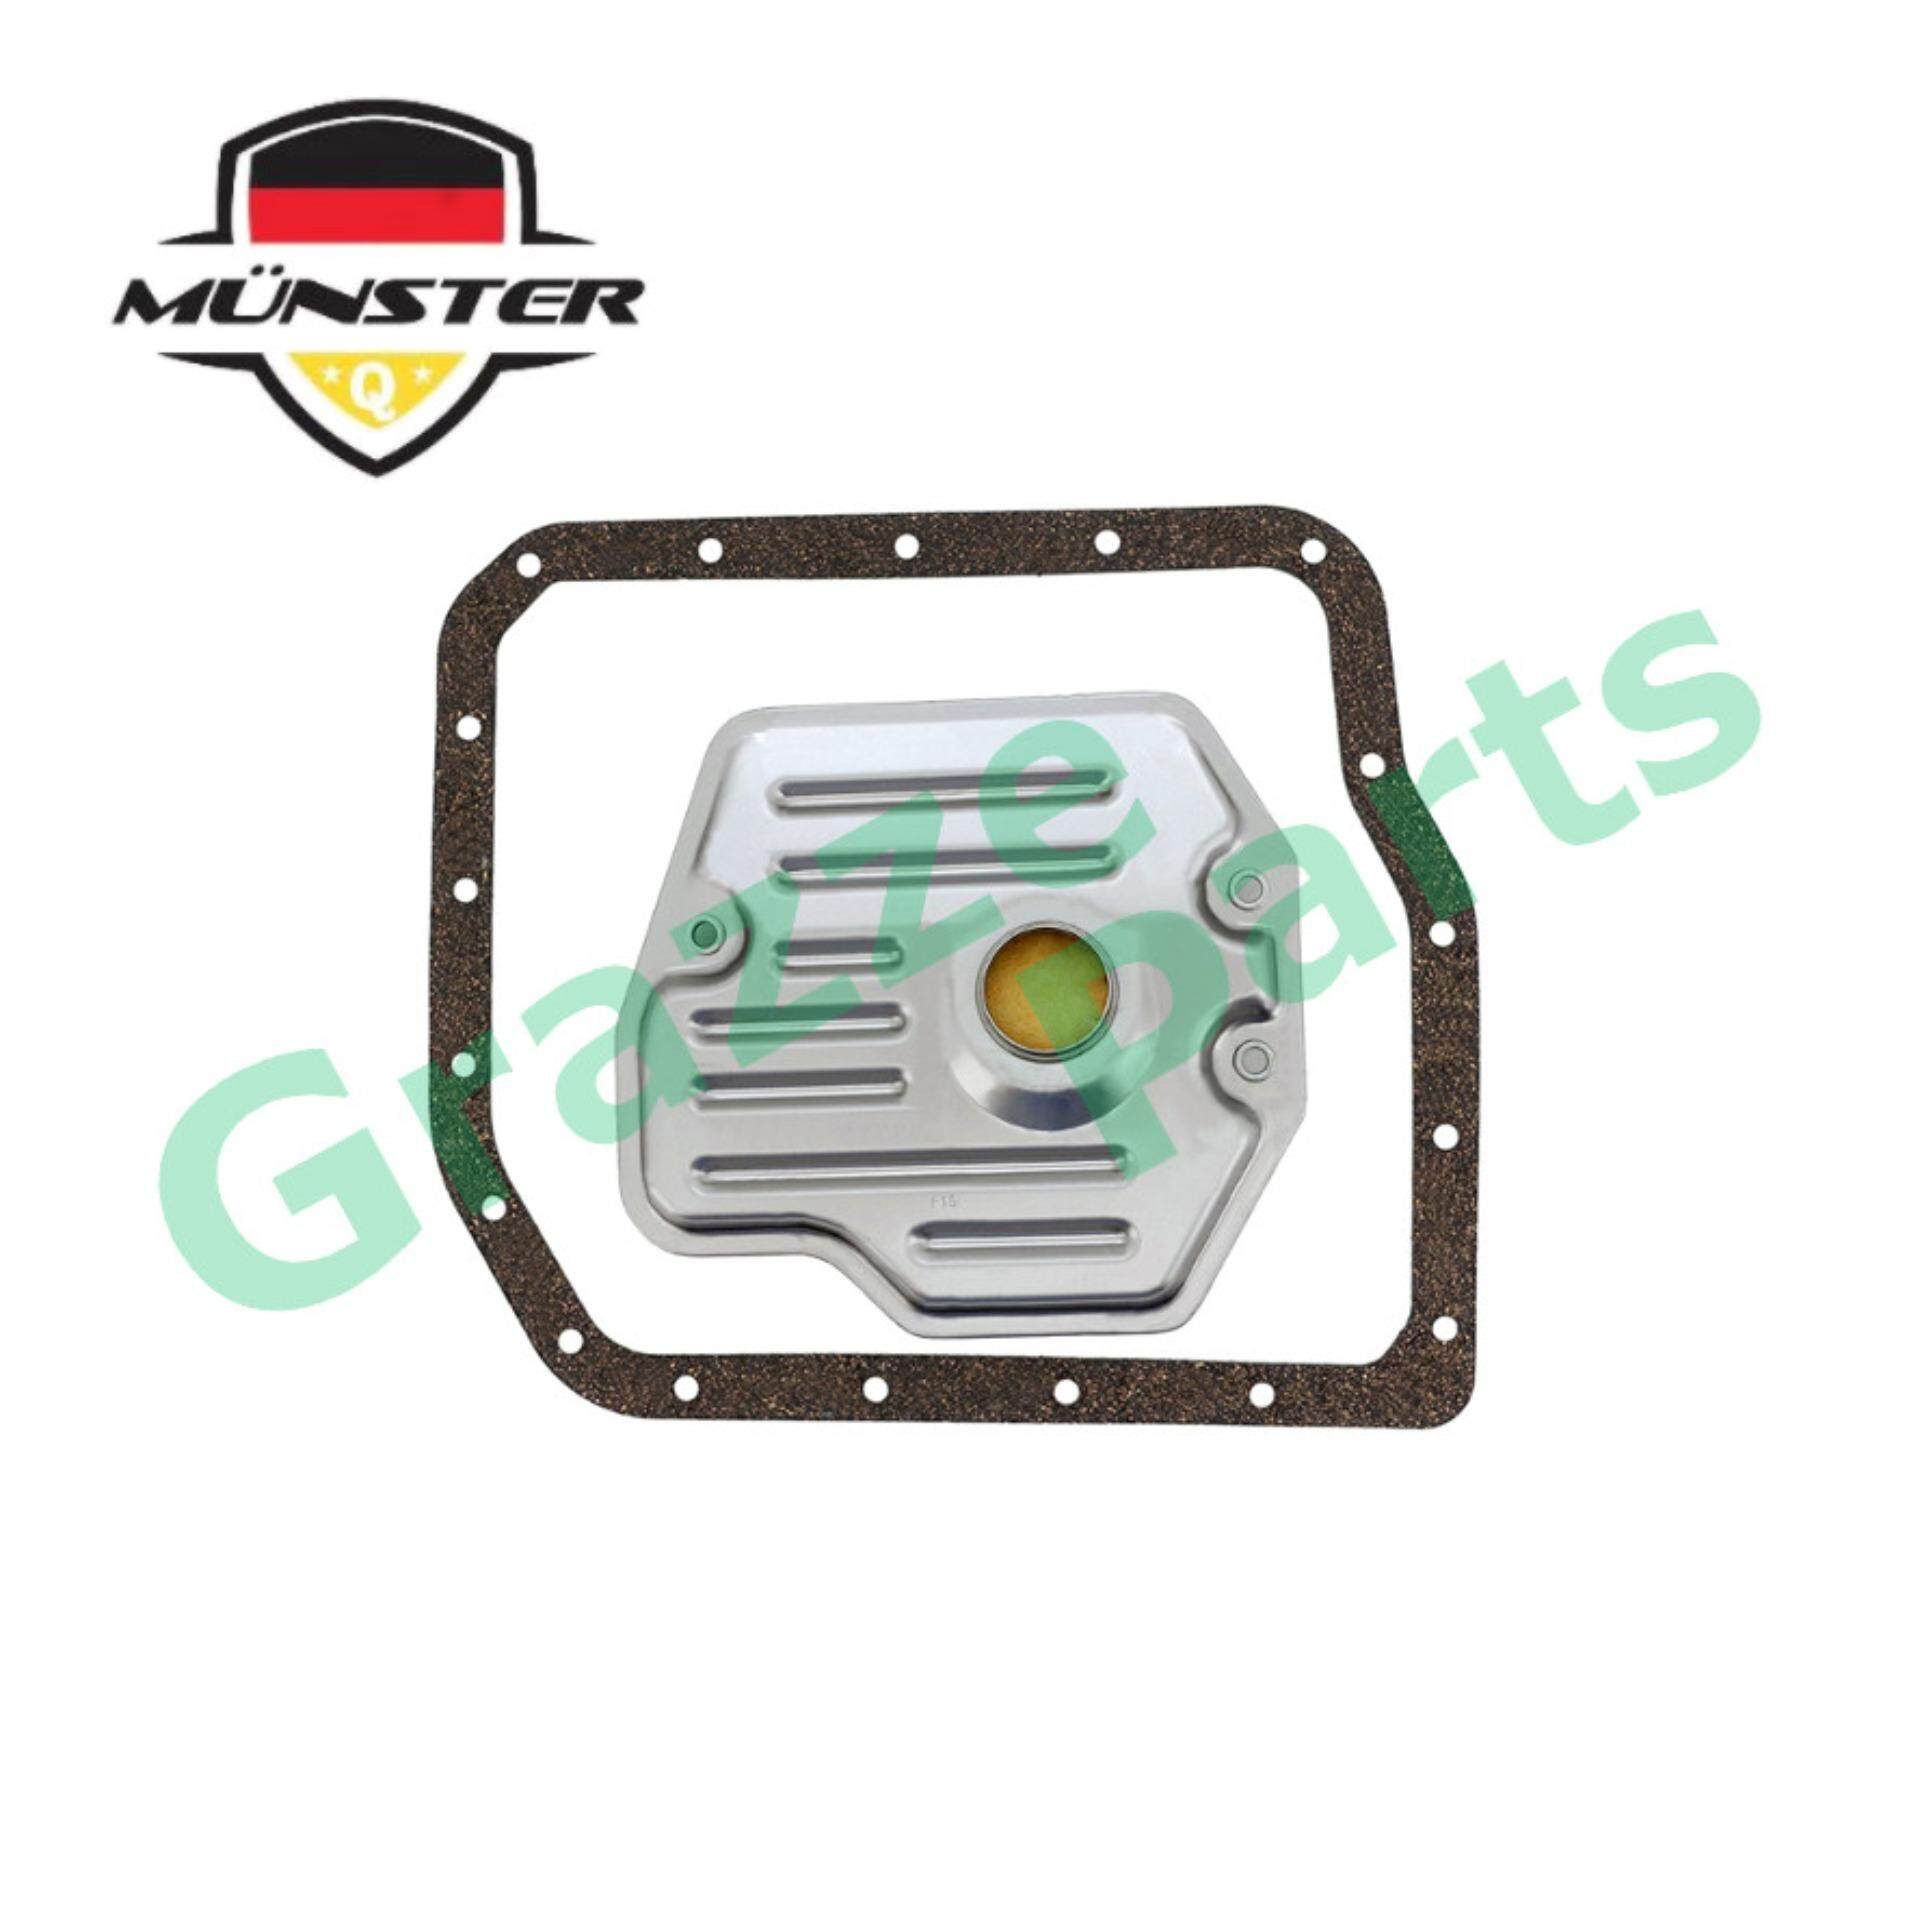 Münster Präzision Technology Auto / AT / Automatic Transmission Filter Set 35330-28010 for Toyota Camry 3.0 MCU15